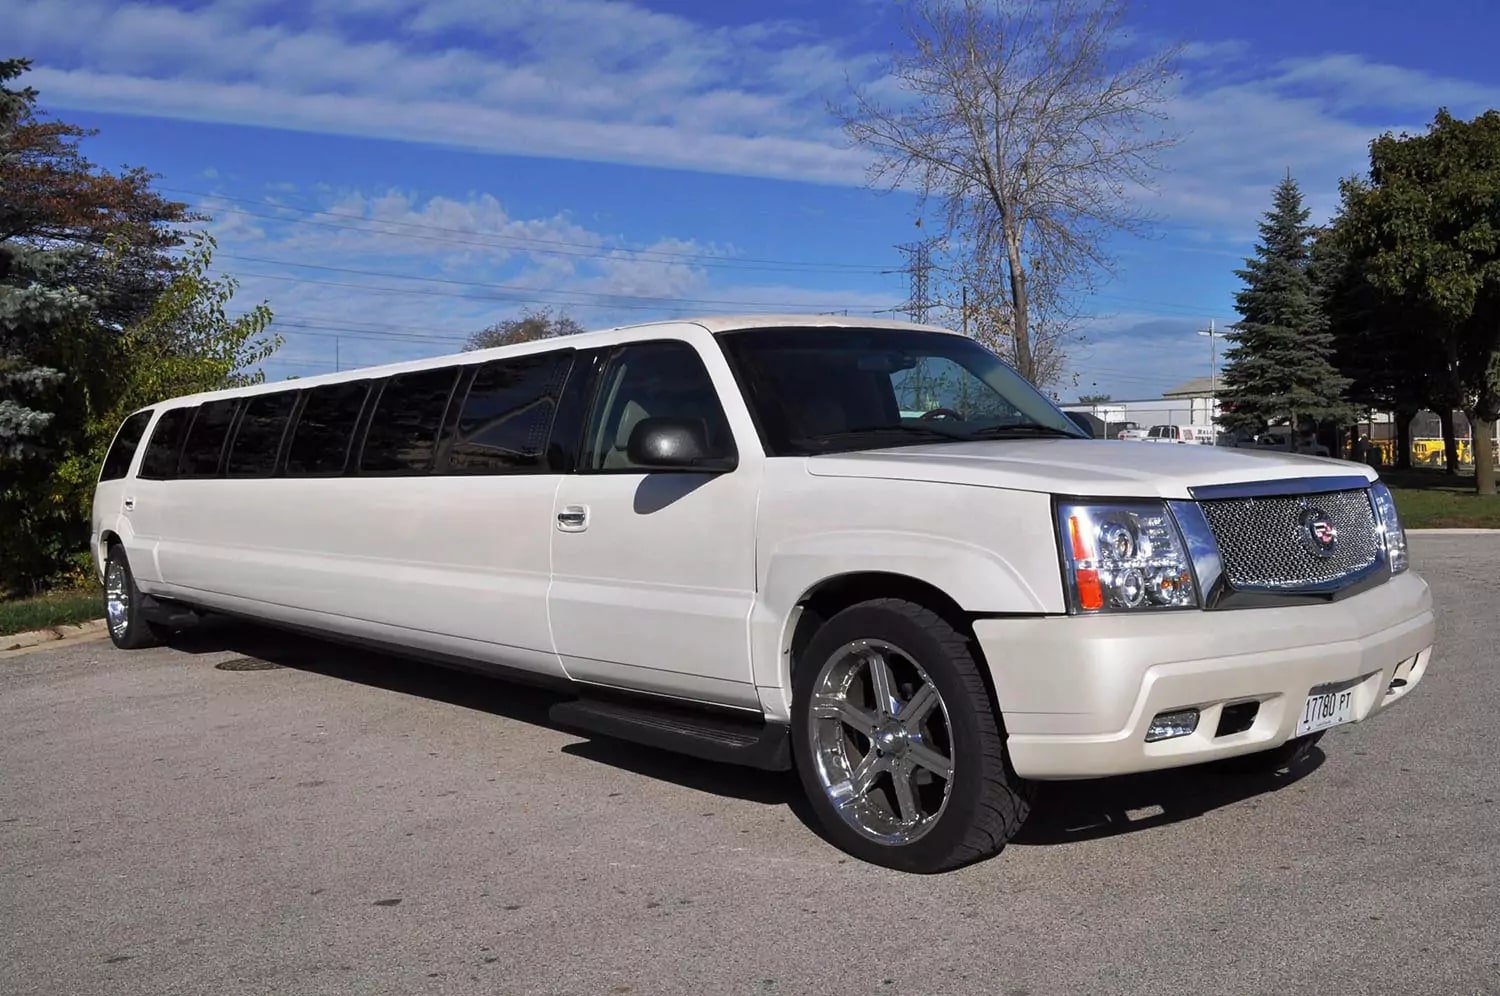 Prom limo bus